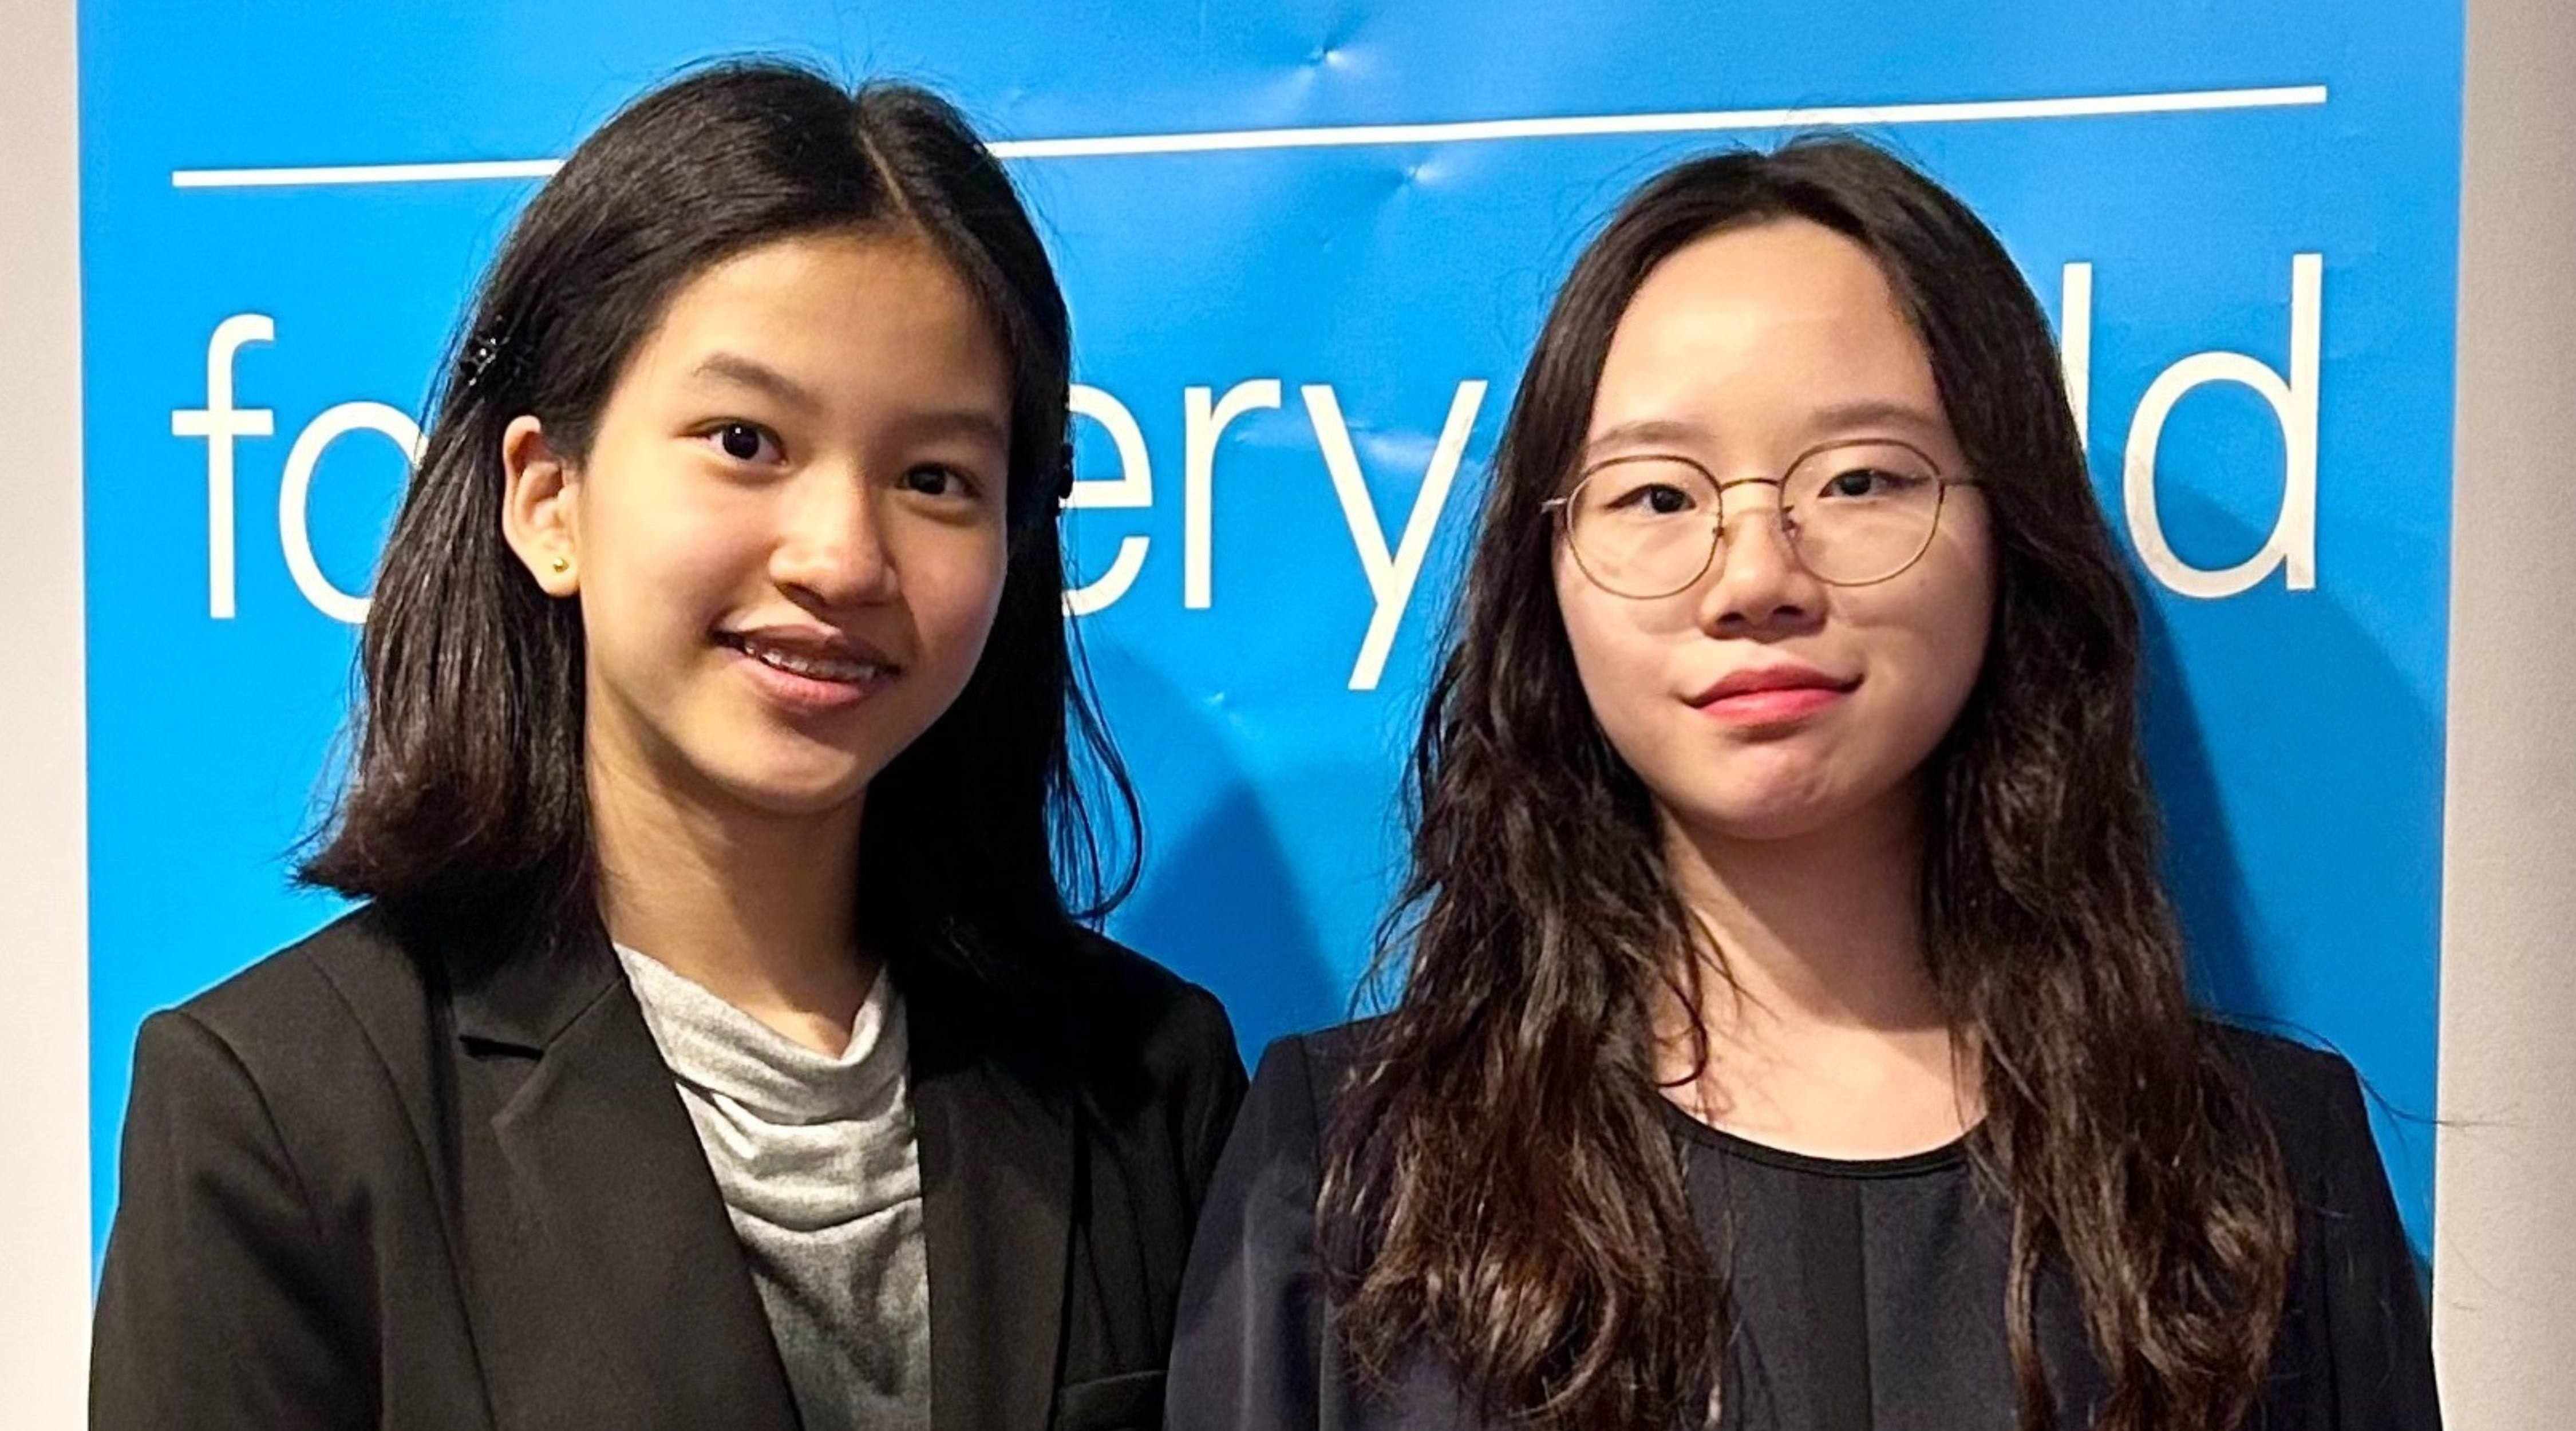 Our BIS HCMC NAE student ambassadors collaborate and develop innovative solutions at the NAE-UNICEF Summit in New York City - Our NAE student ambassadors collaborate and develop innovative solutions